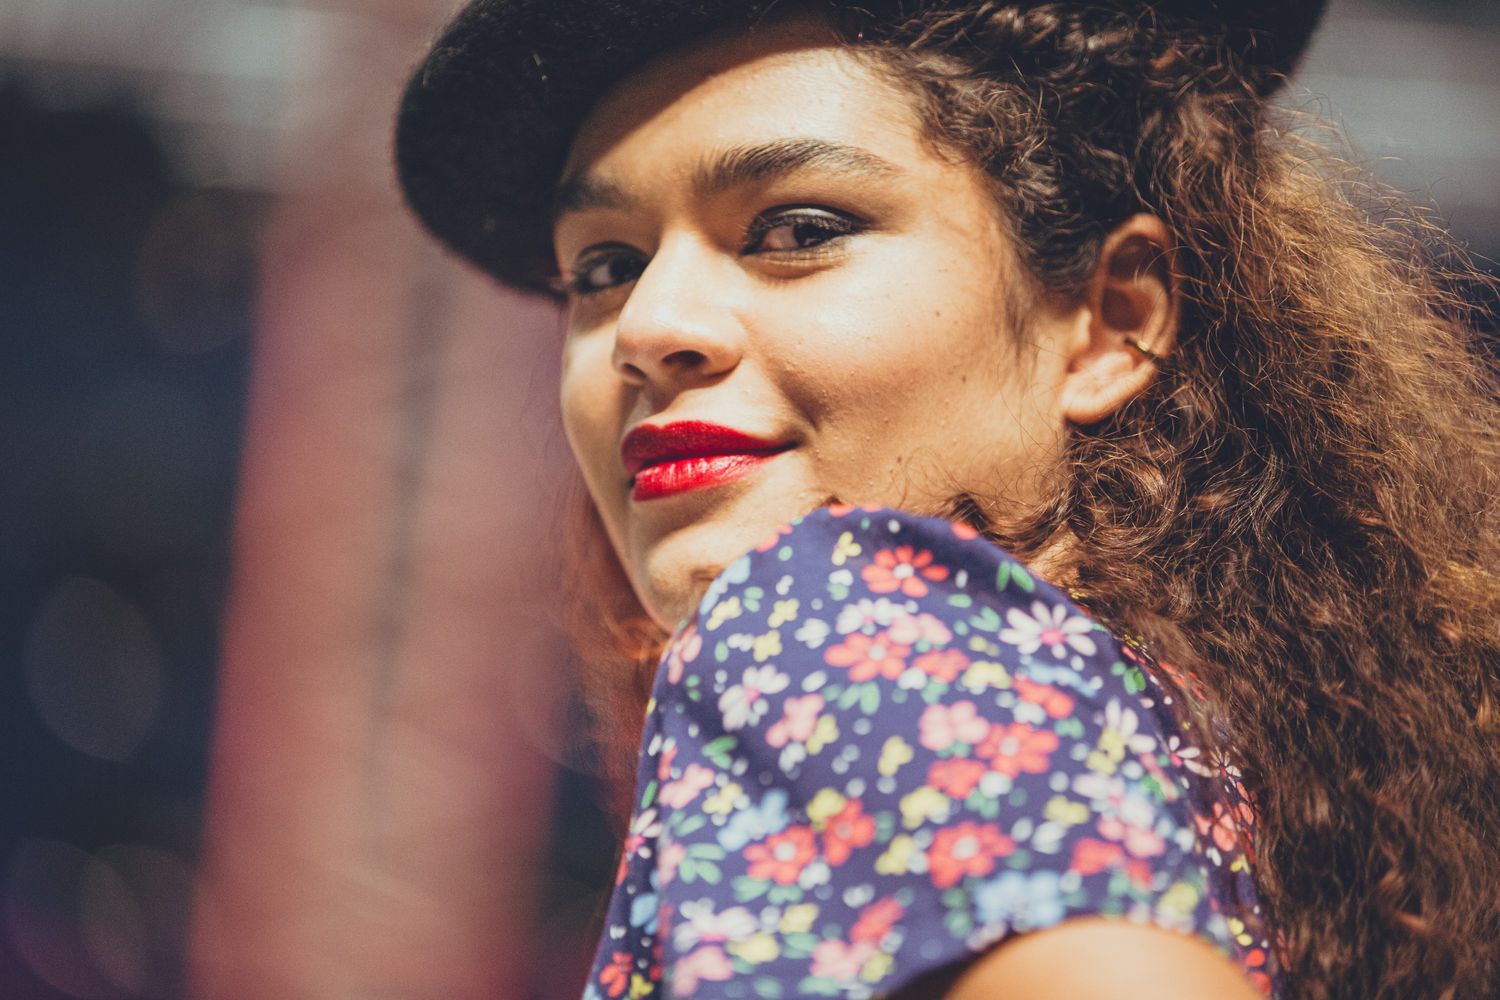 Close up of a female model wearing red lipstick and looking over her shoulder at the camera with a small smile